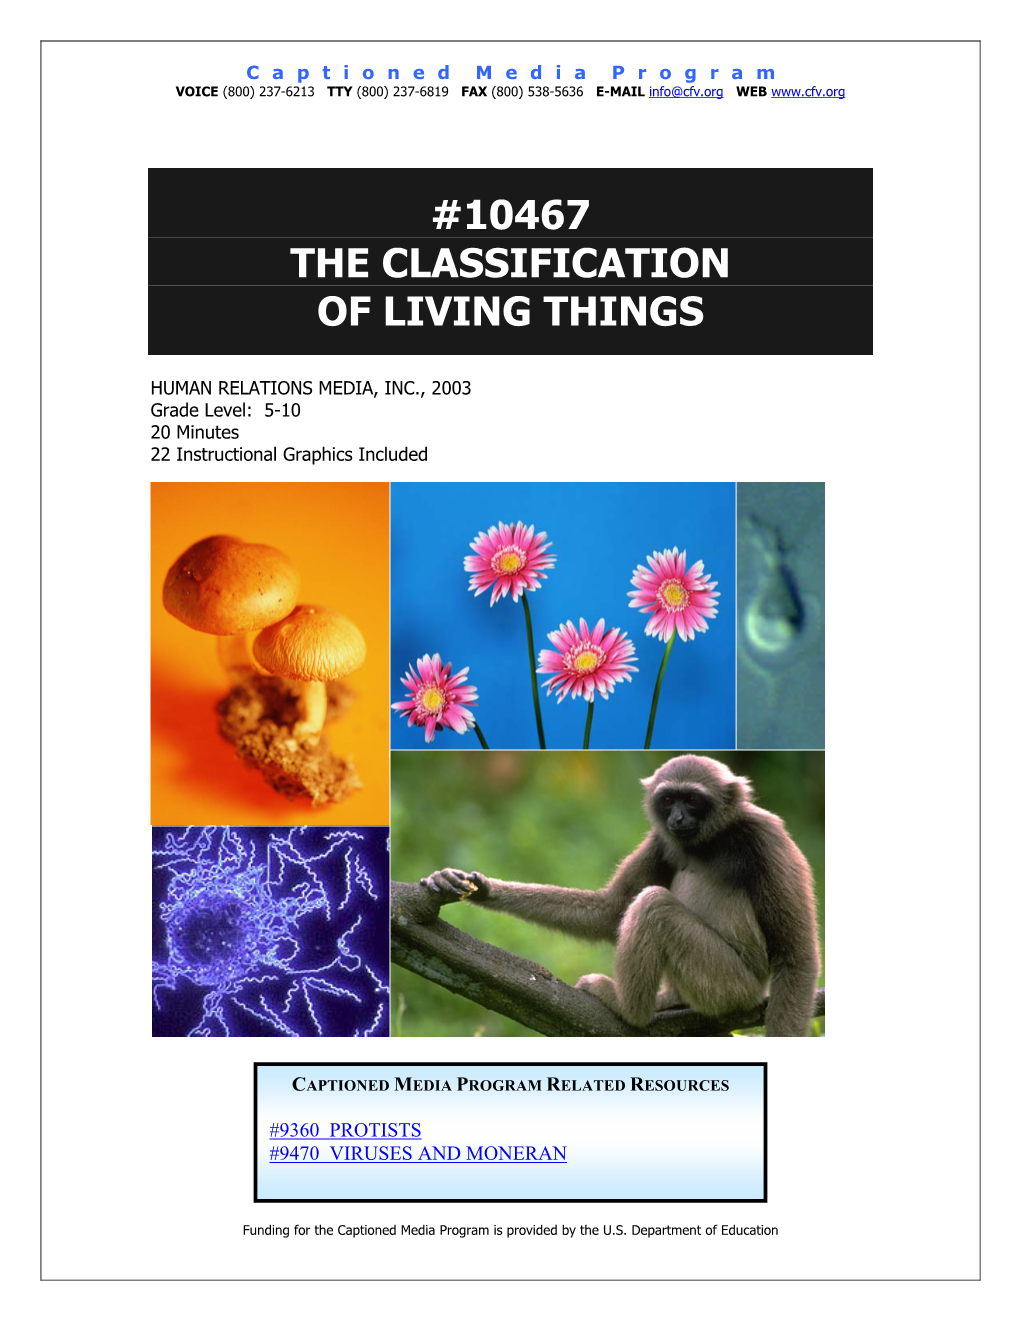 10467 the Classification of Living Things